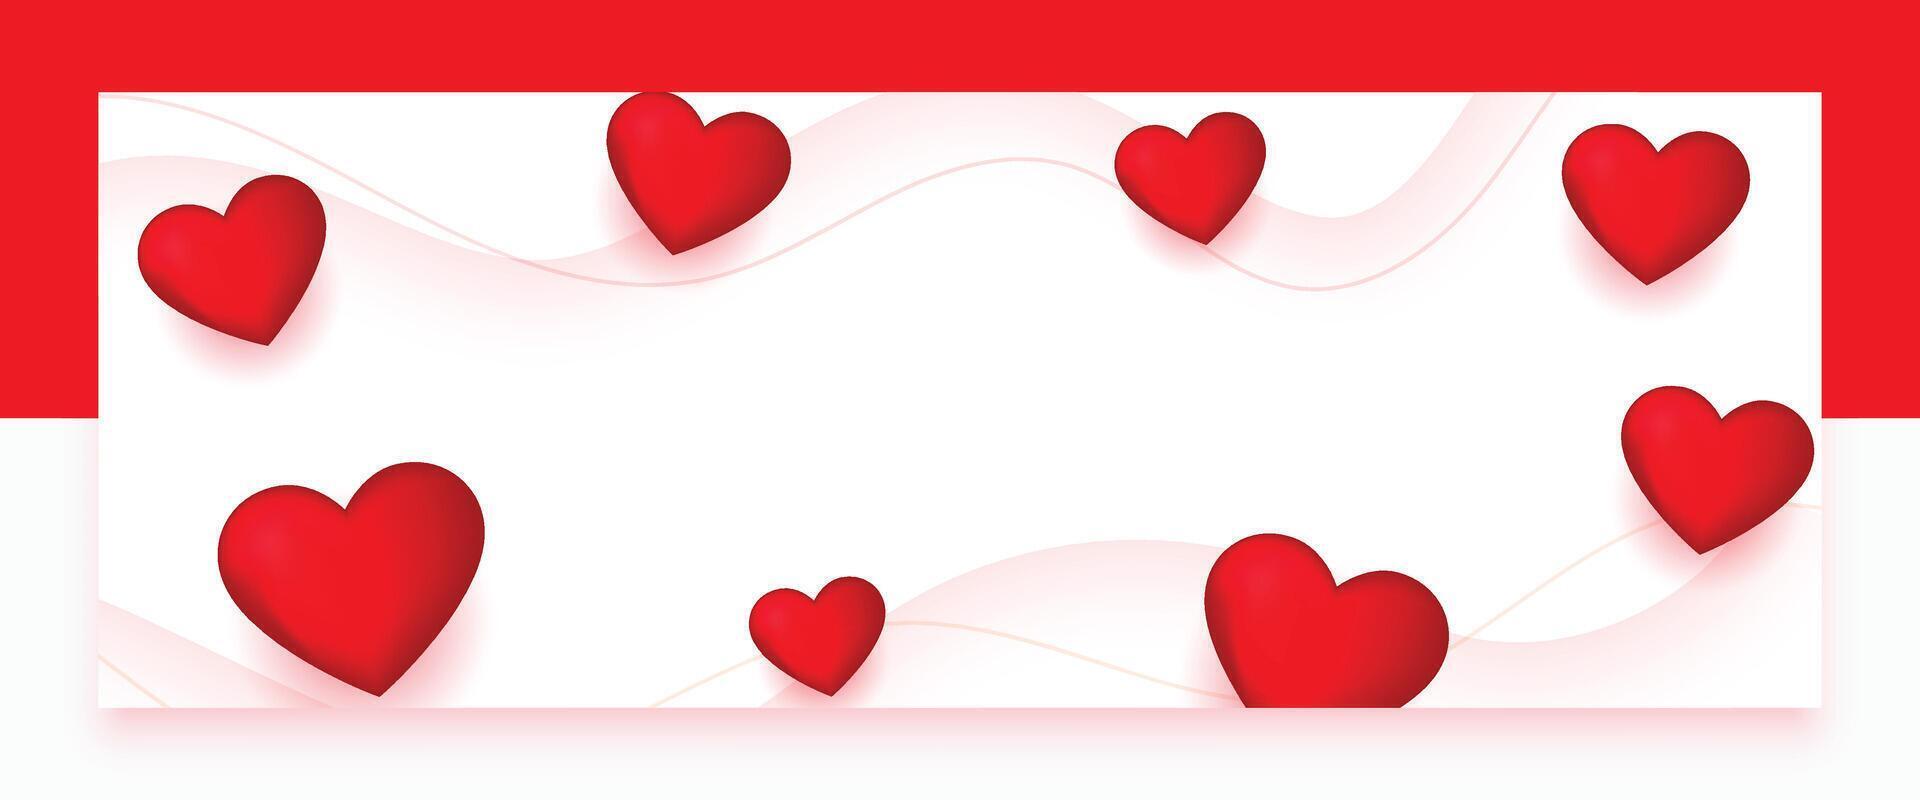 cute floating love heart greeting banner for valentines day celebration vector